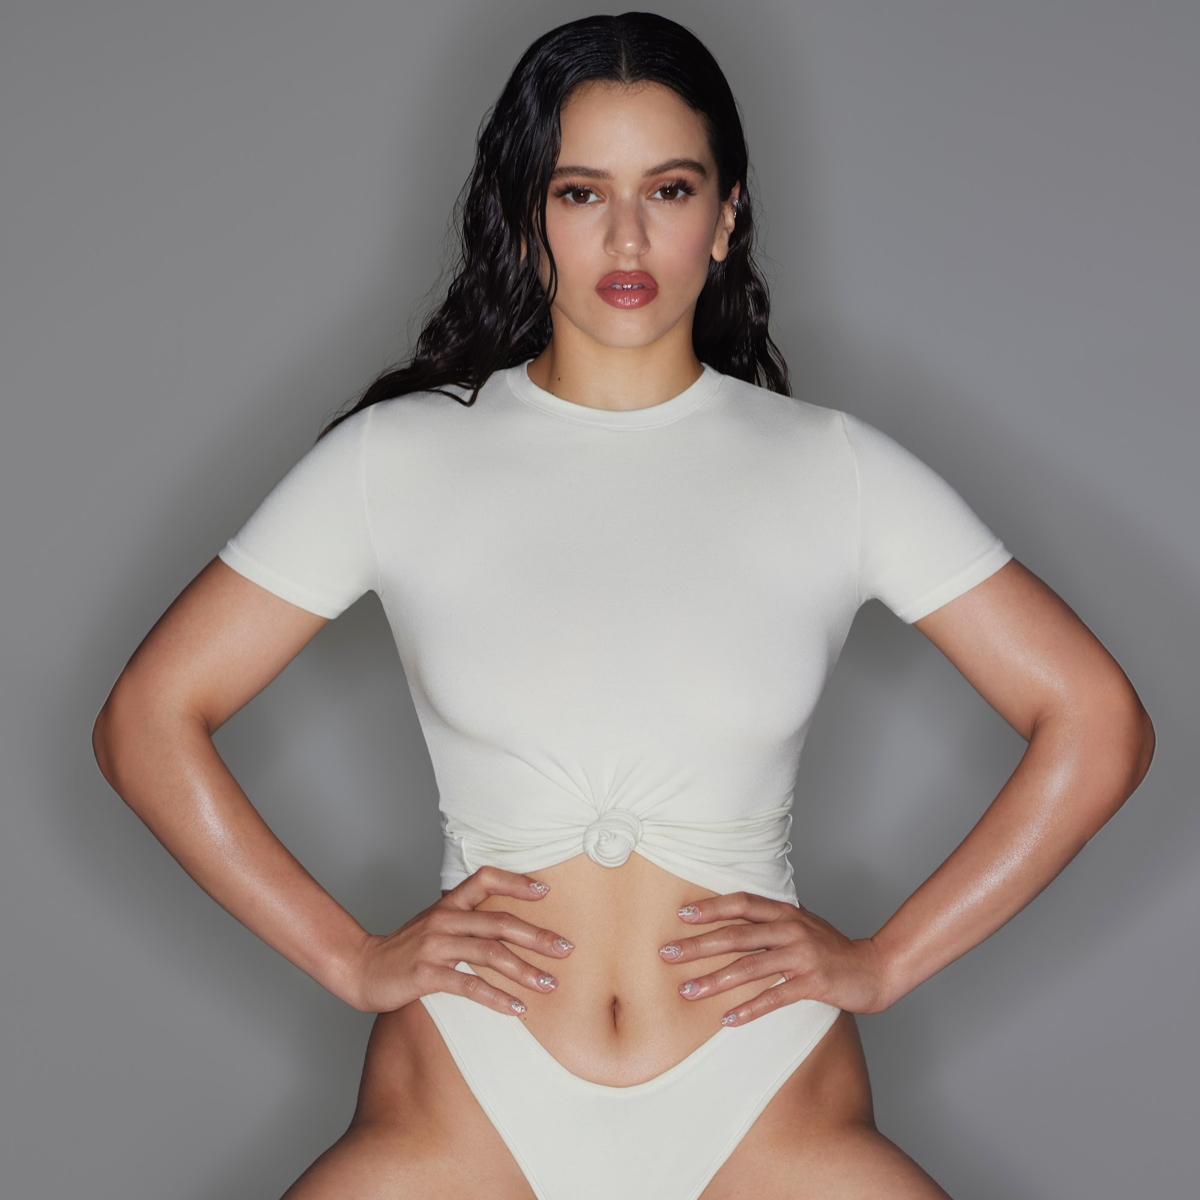 Rosalía bares her cotton underwear for SKIMS's first bilingual campaign  [Video]